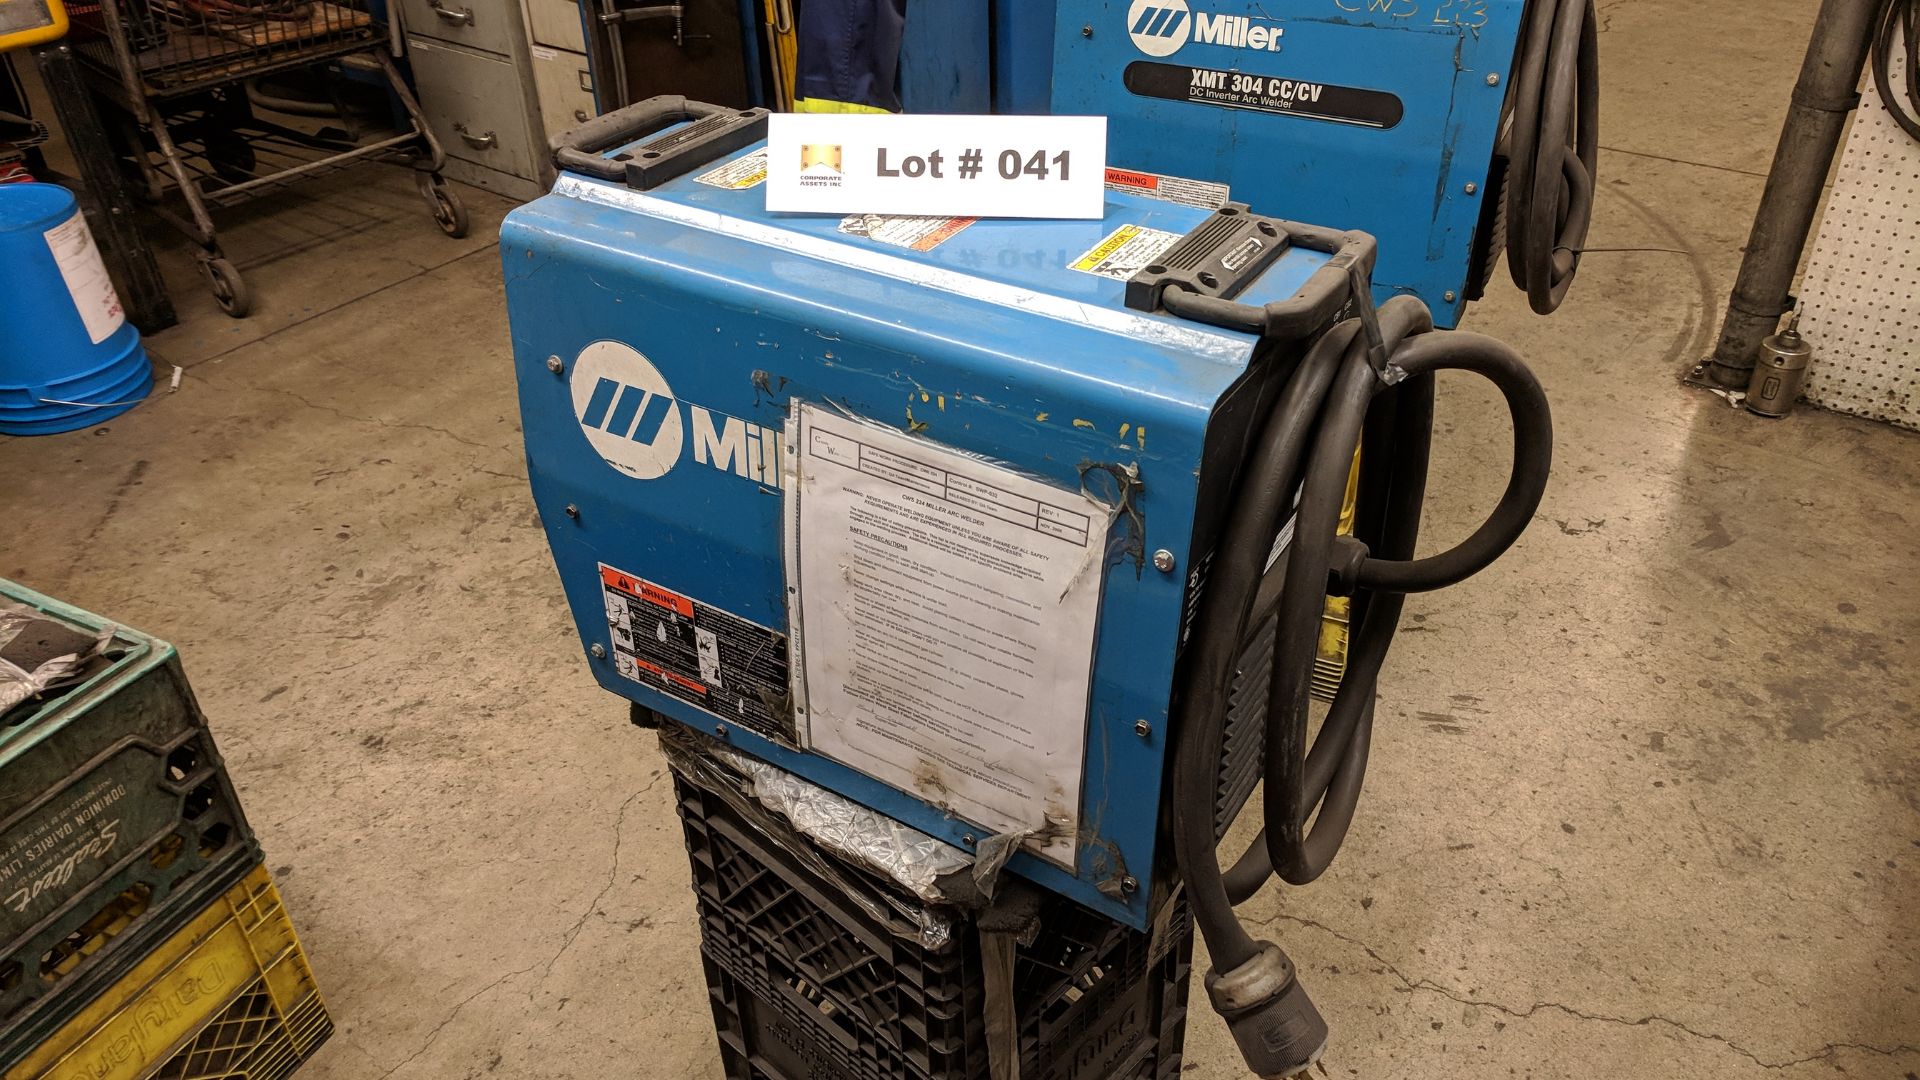 MILLER XMT 304 CC/CV DC INVERTER ARC WELDER WITH CABLES AND GUN, S/N N/A - Image 2 of 2